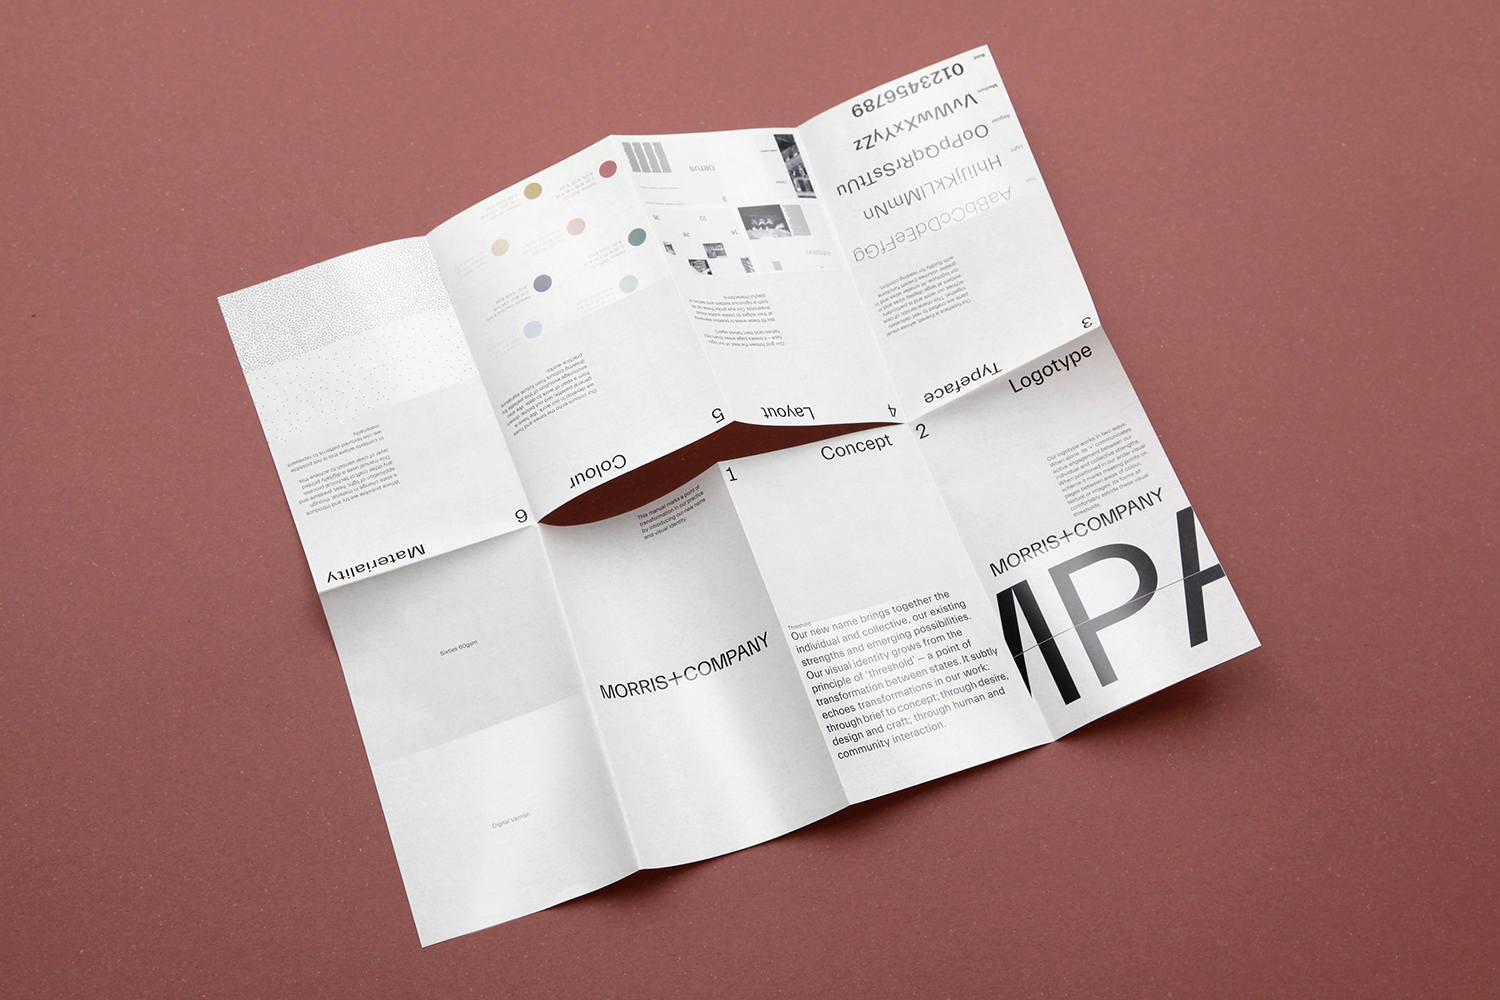 Naming, logotype, tote bags, stationery, brand guiedlines and brochures by Bob Design for architectural practice Morris+Company